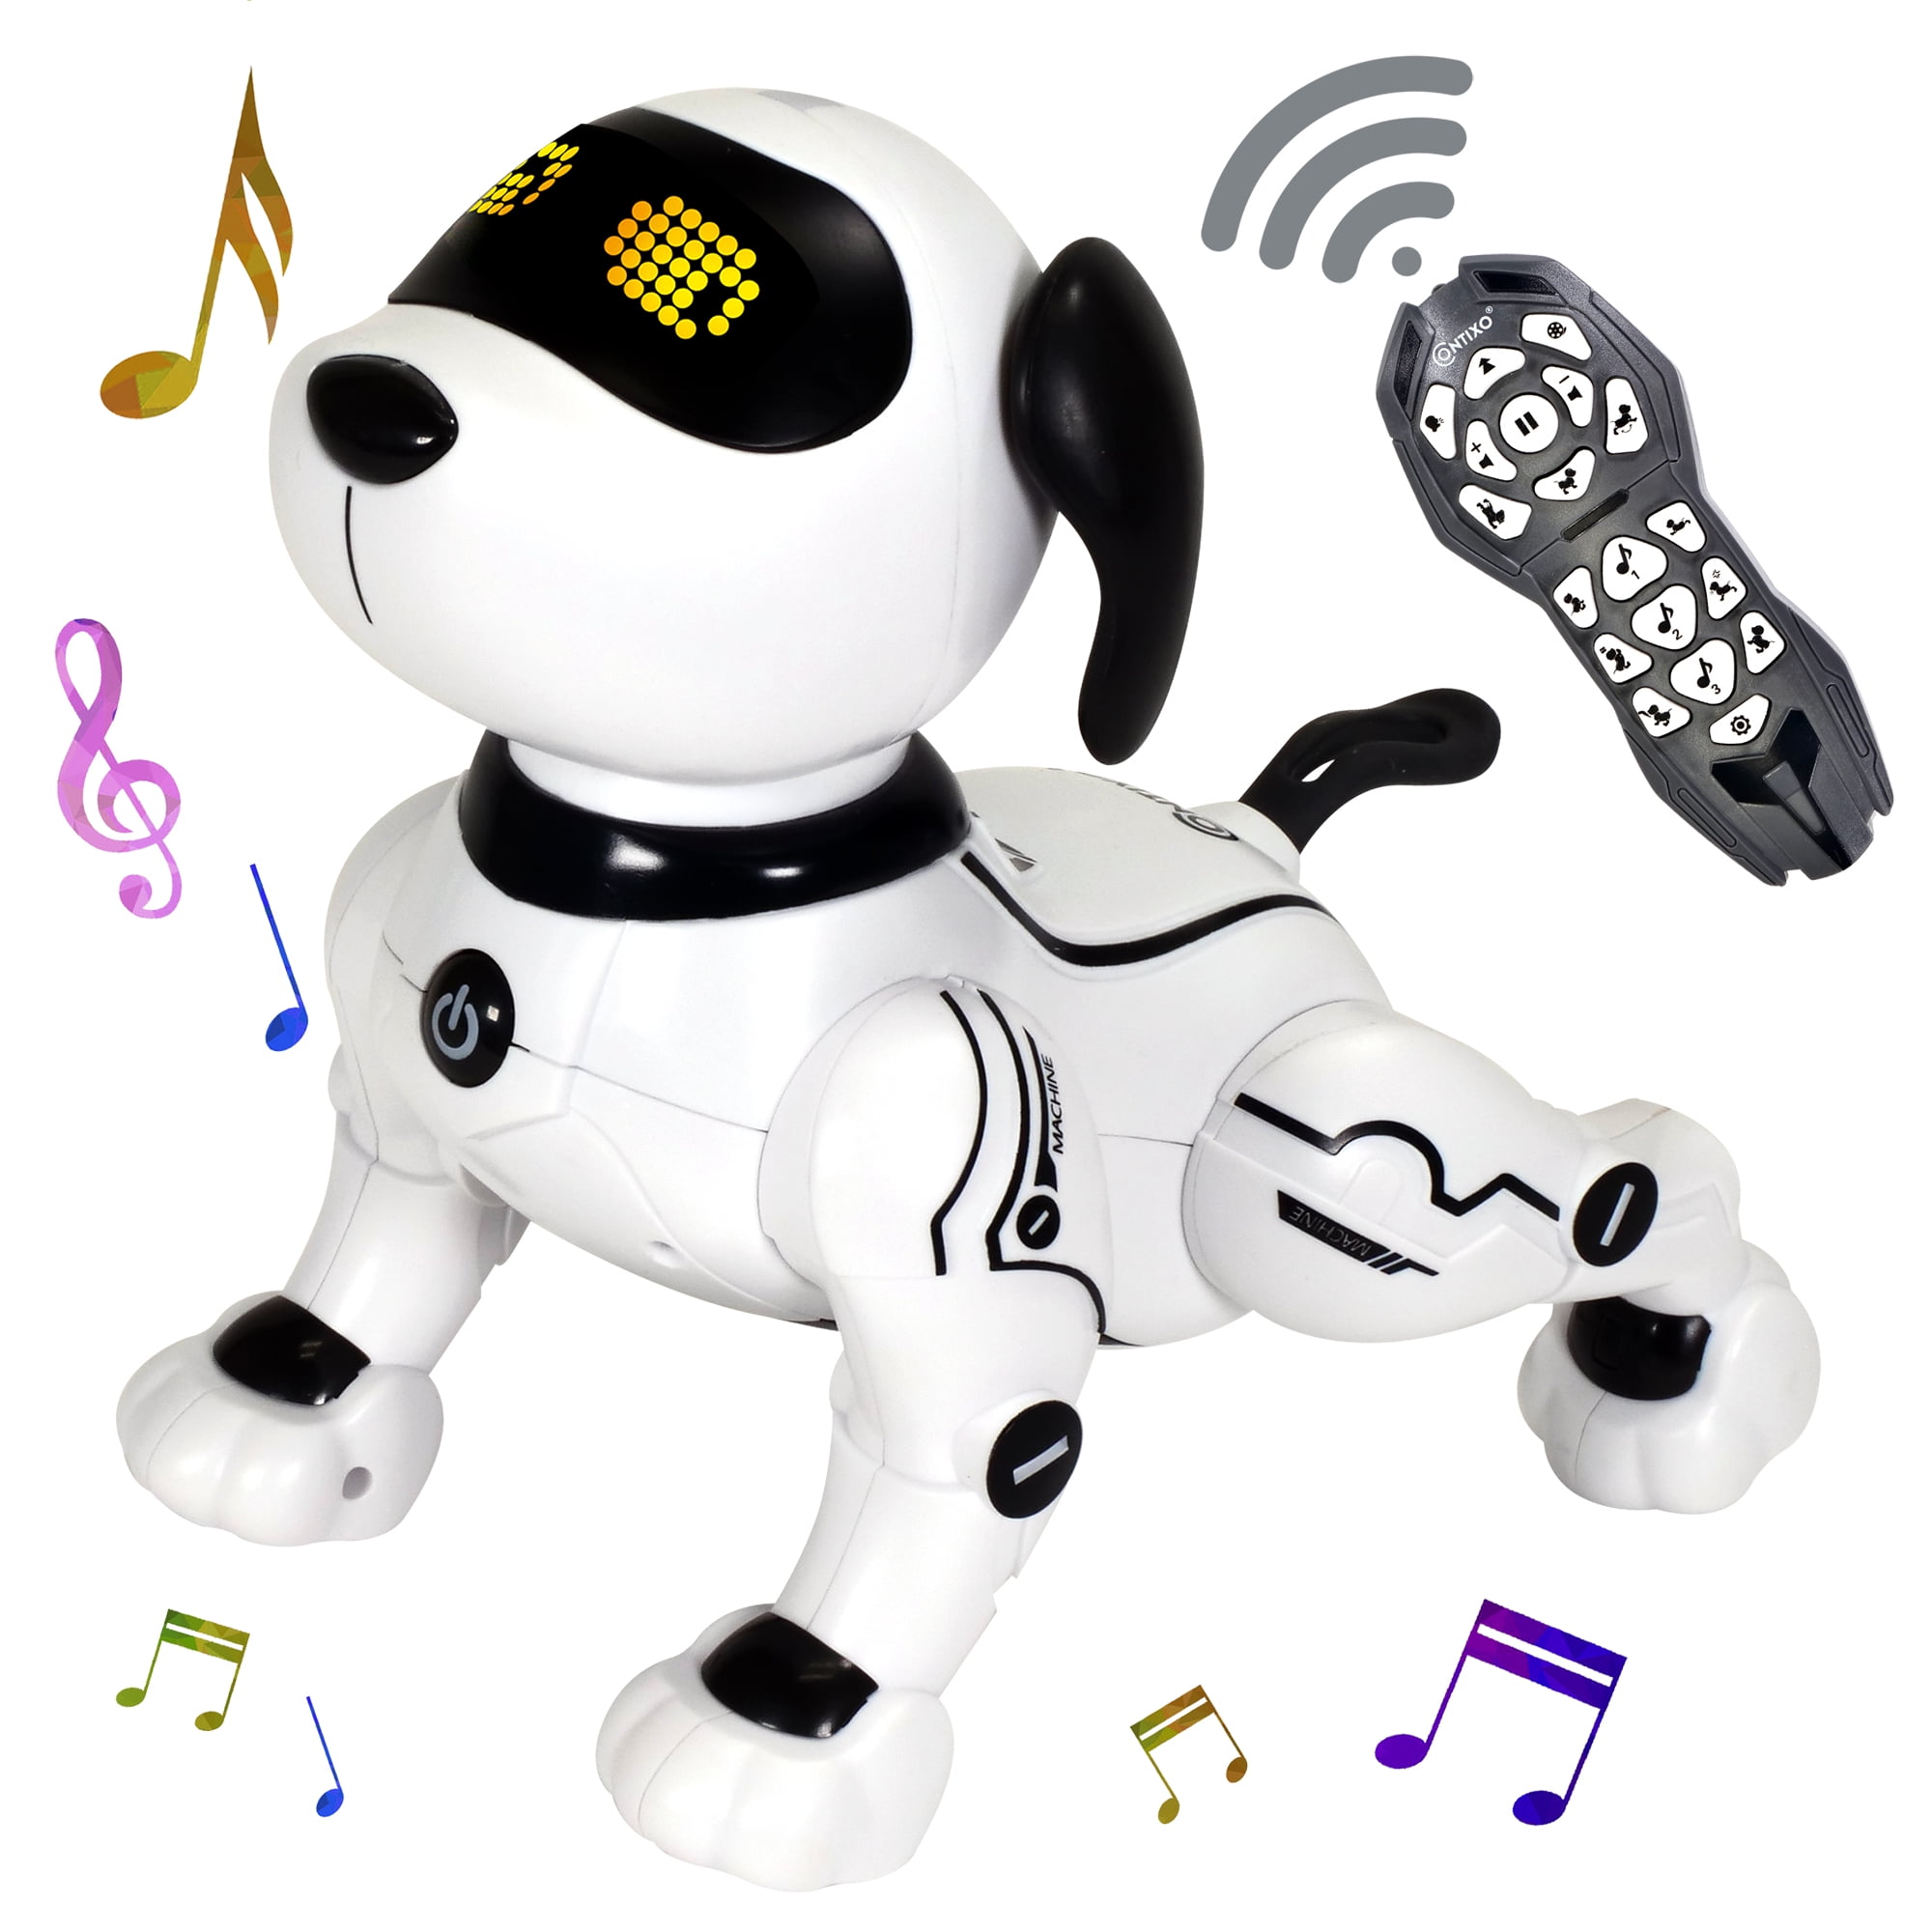 Original Wowwee Remote Control for Robopet Robot Dog Interactive Toy 